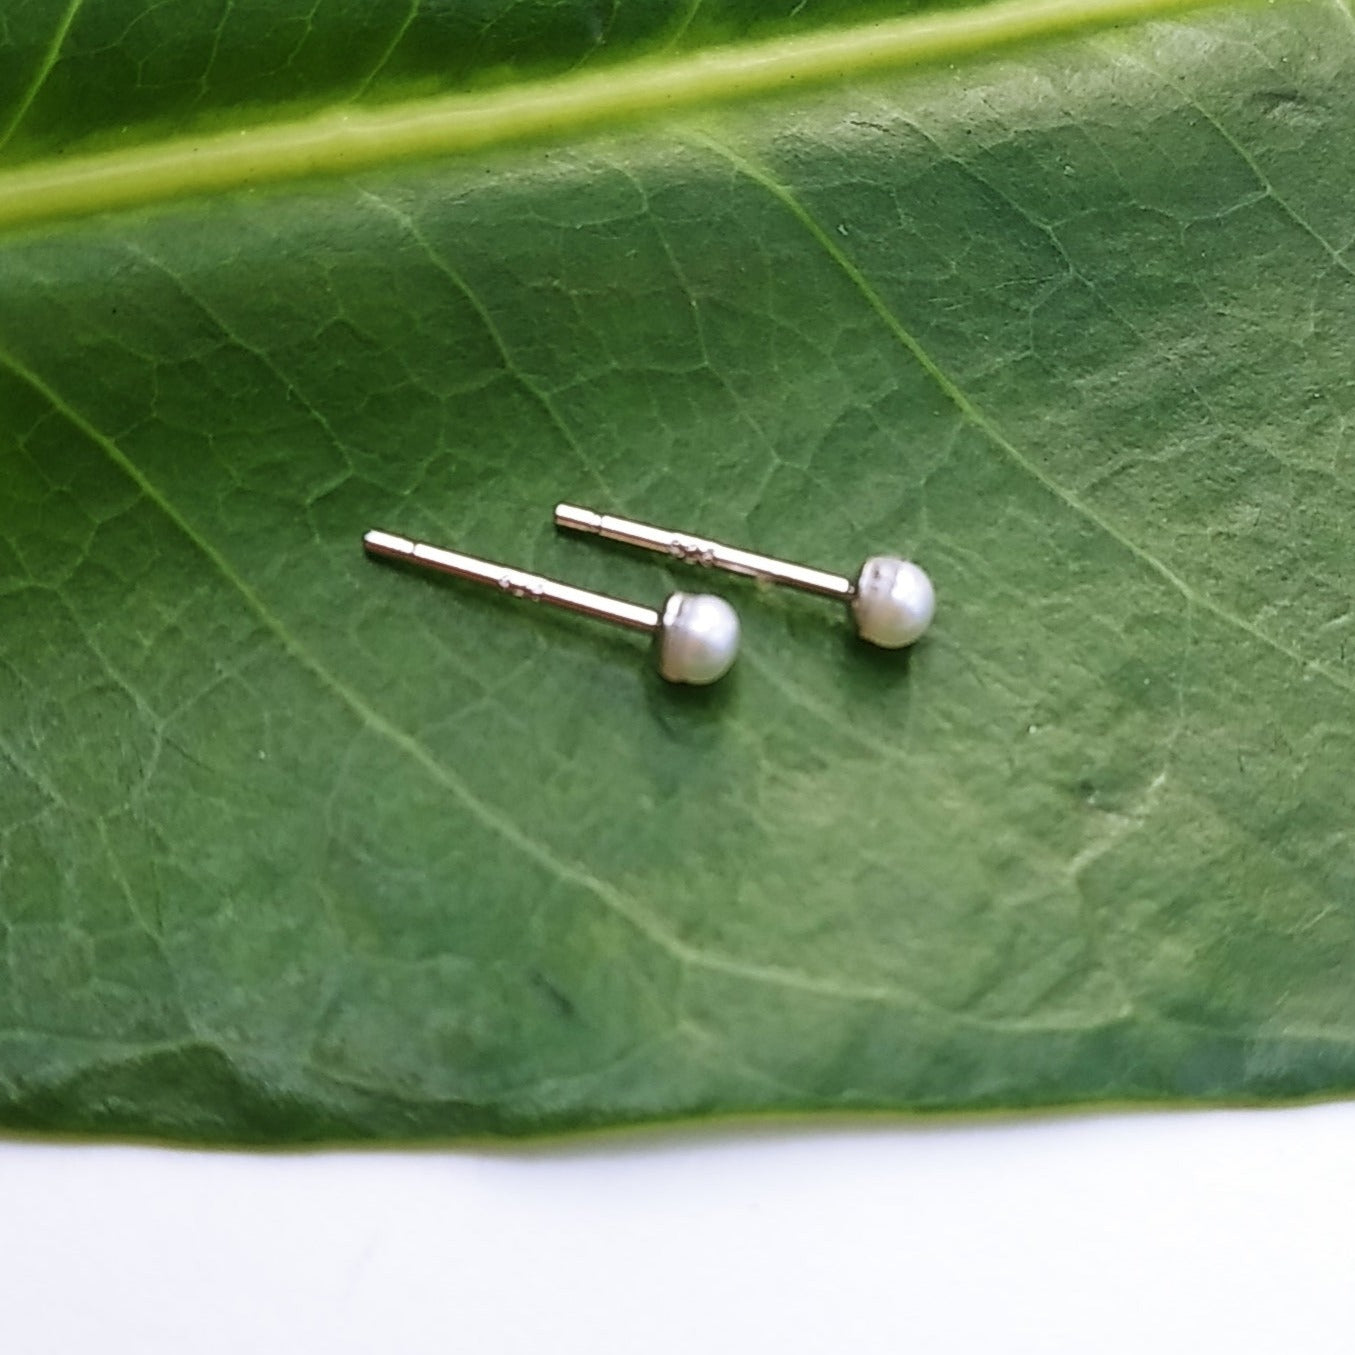 "Classic" 2-3mm (TINY) Micro-stud Earrings - Pearls, Sterling